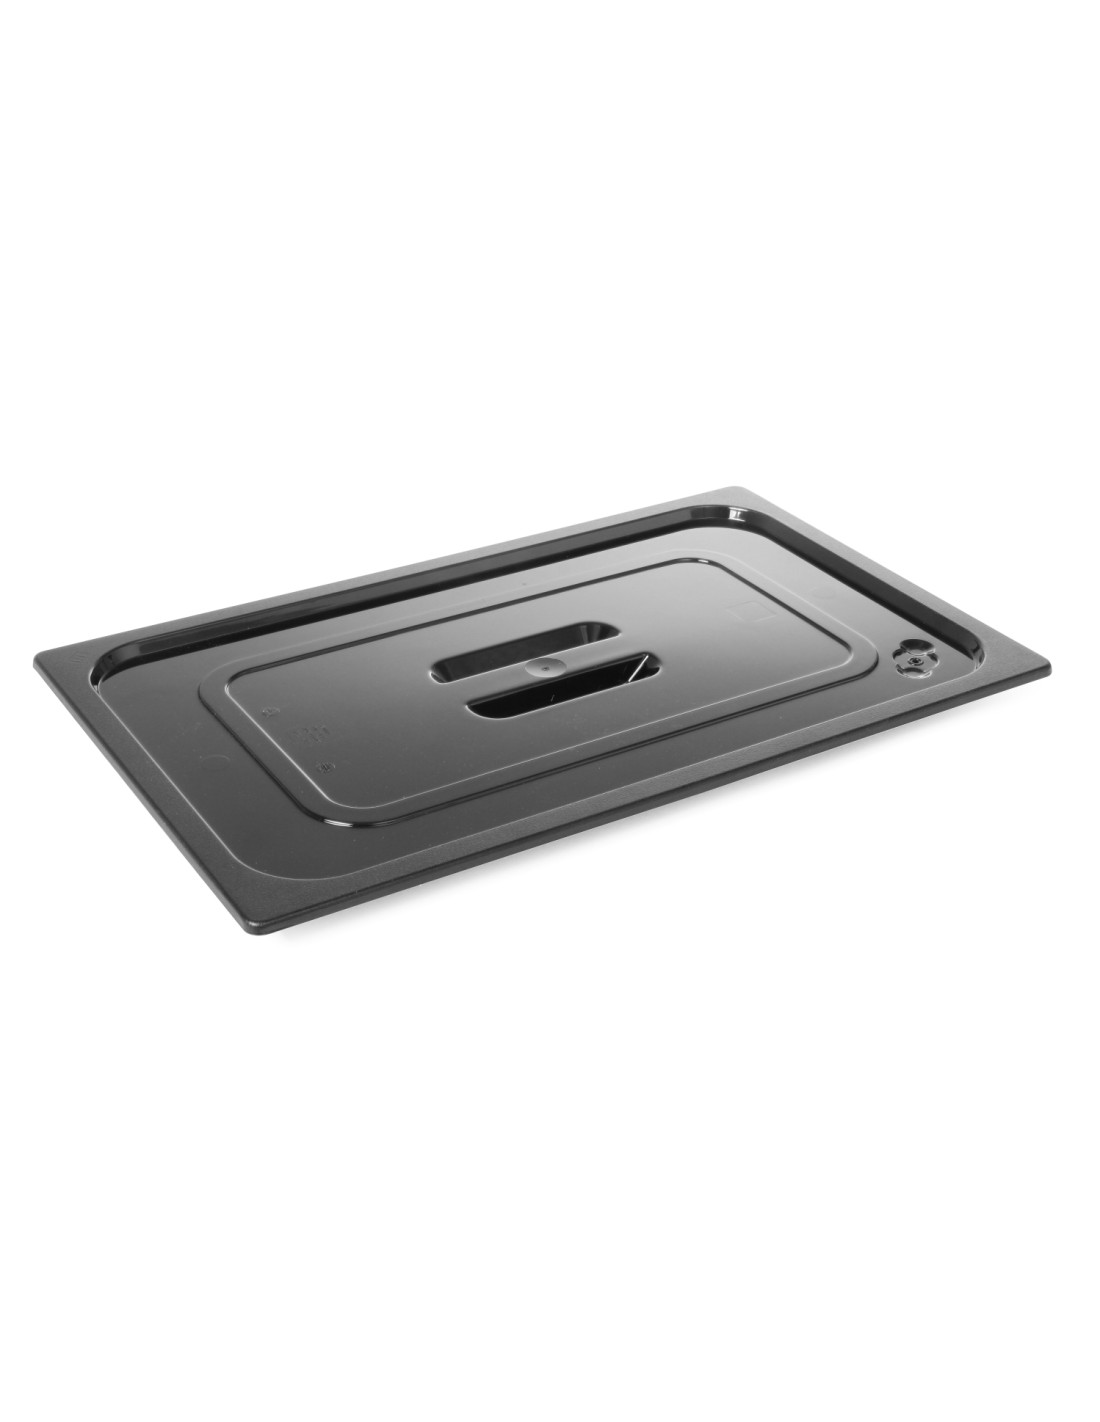 Lid for GN 1/6 trays - In black polycarbonate - mm 176 x 162